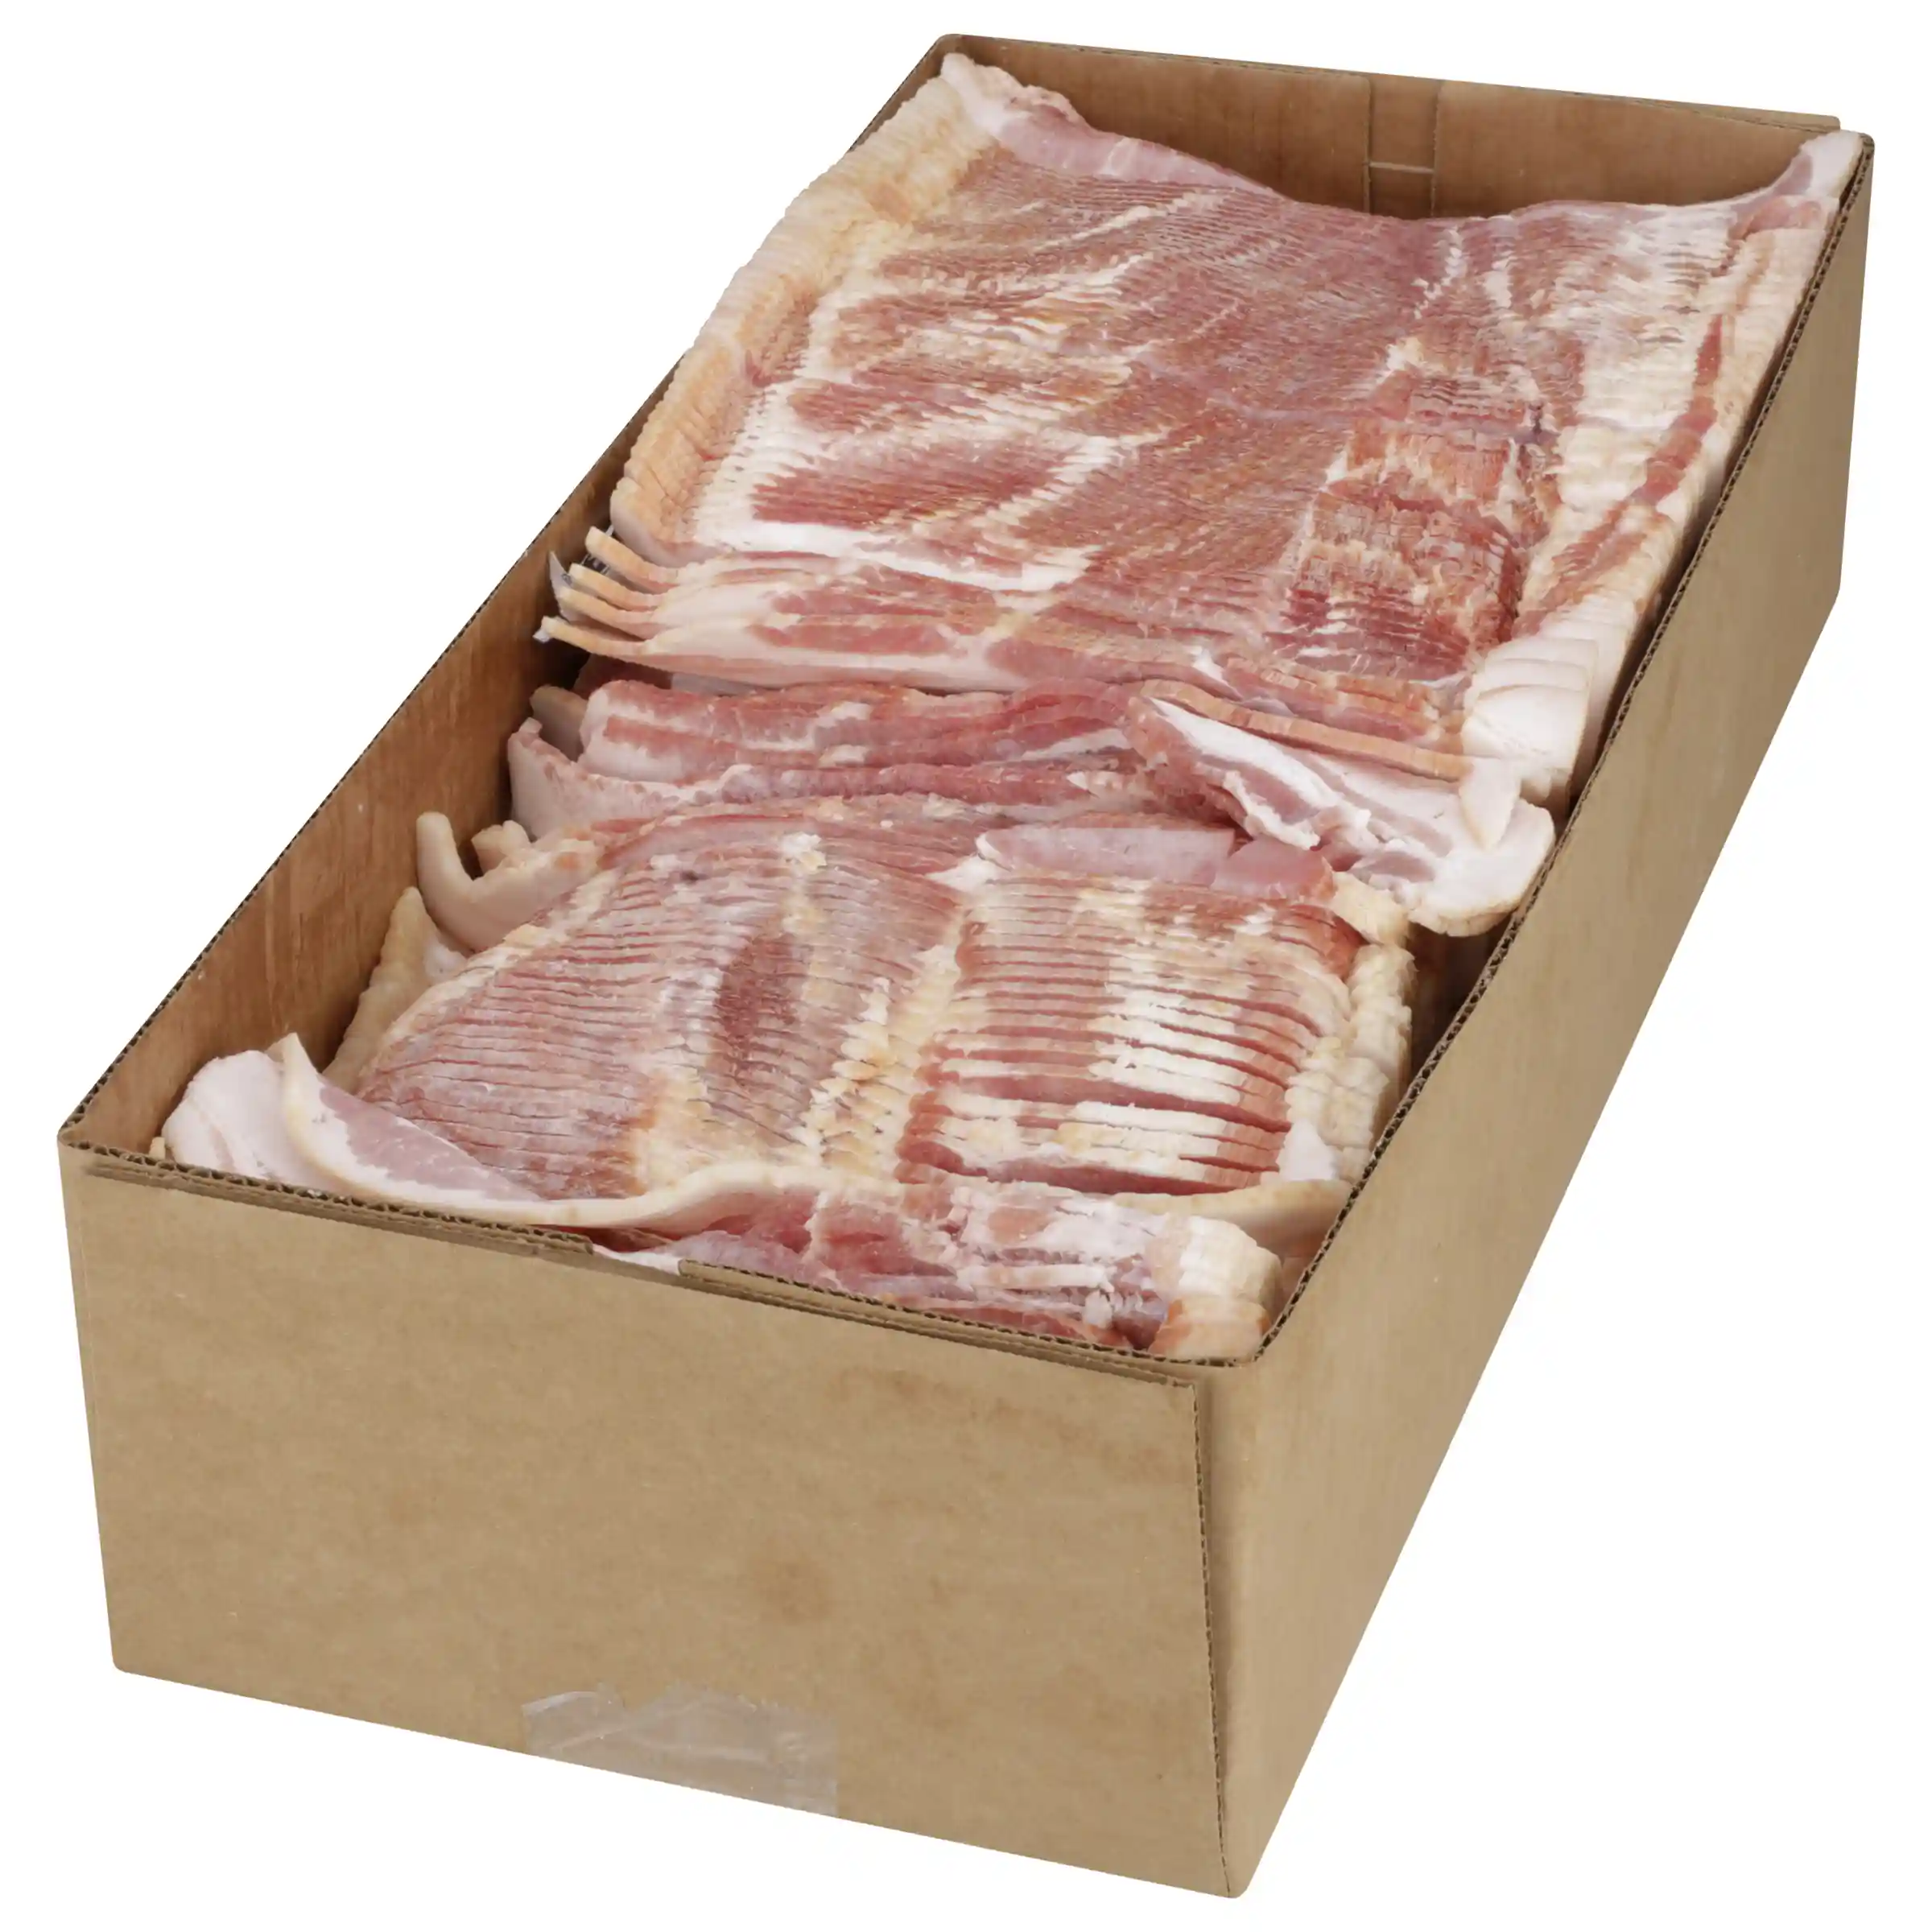 Wright® Brand Naturally Hickory Smoked Thick Sliced Bacon, Bulk, 30 Lbs, 10-14 Slices per Pound, Frozen_image_31